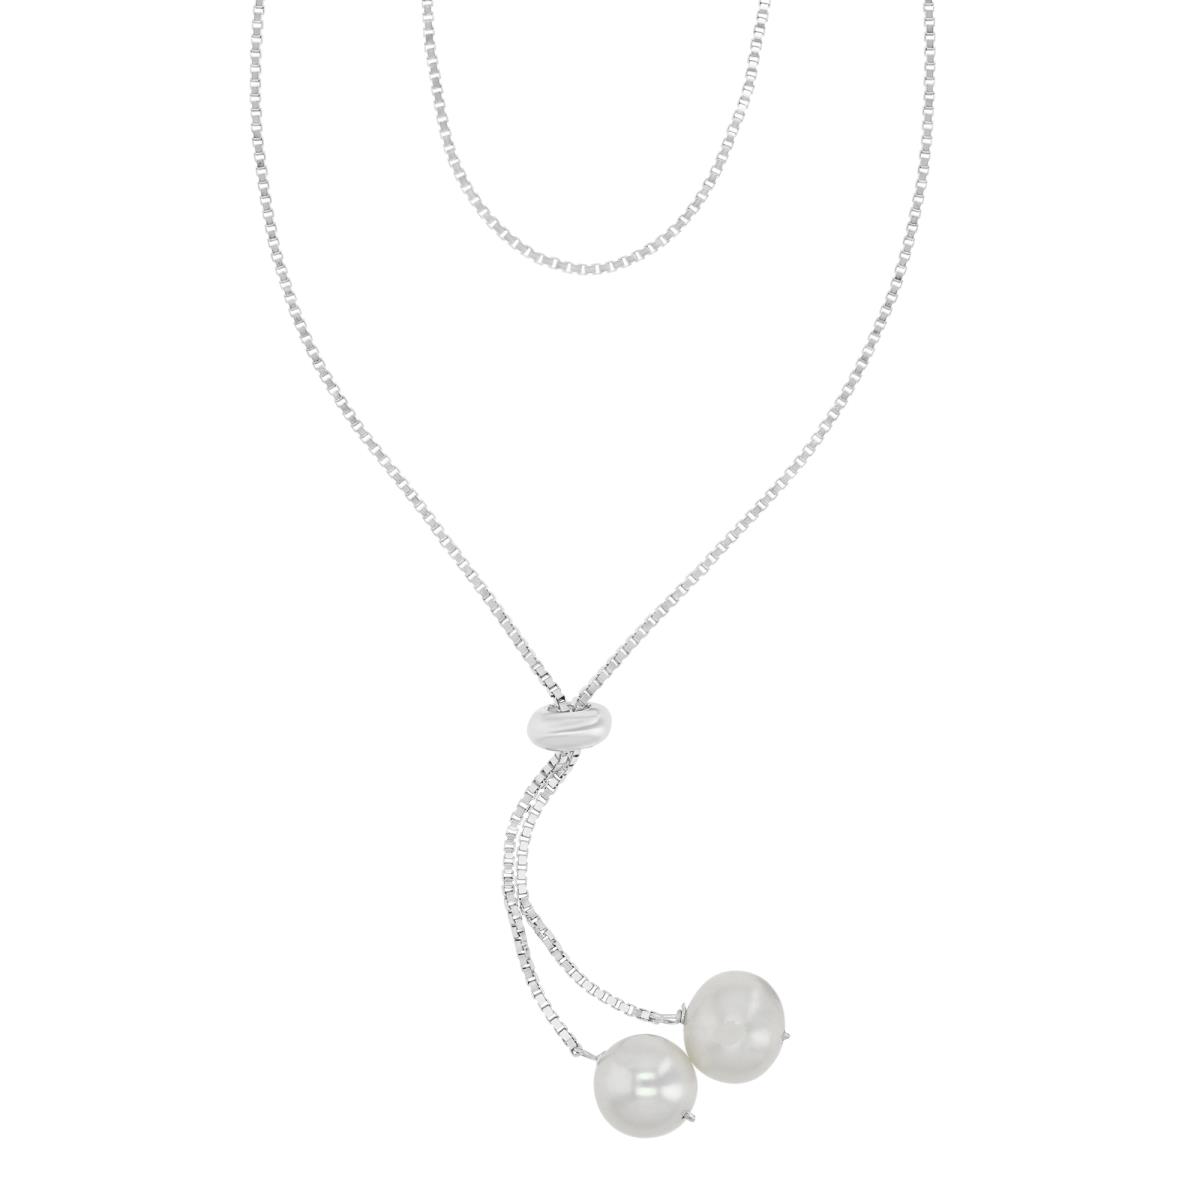 Sterling Silver Rhodium 8MM Round White FWP Adjustable Dangling 32" Necklace